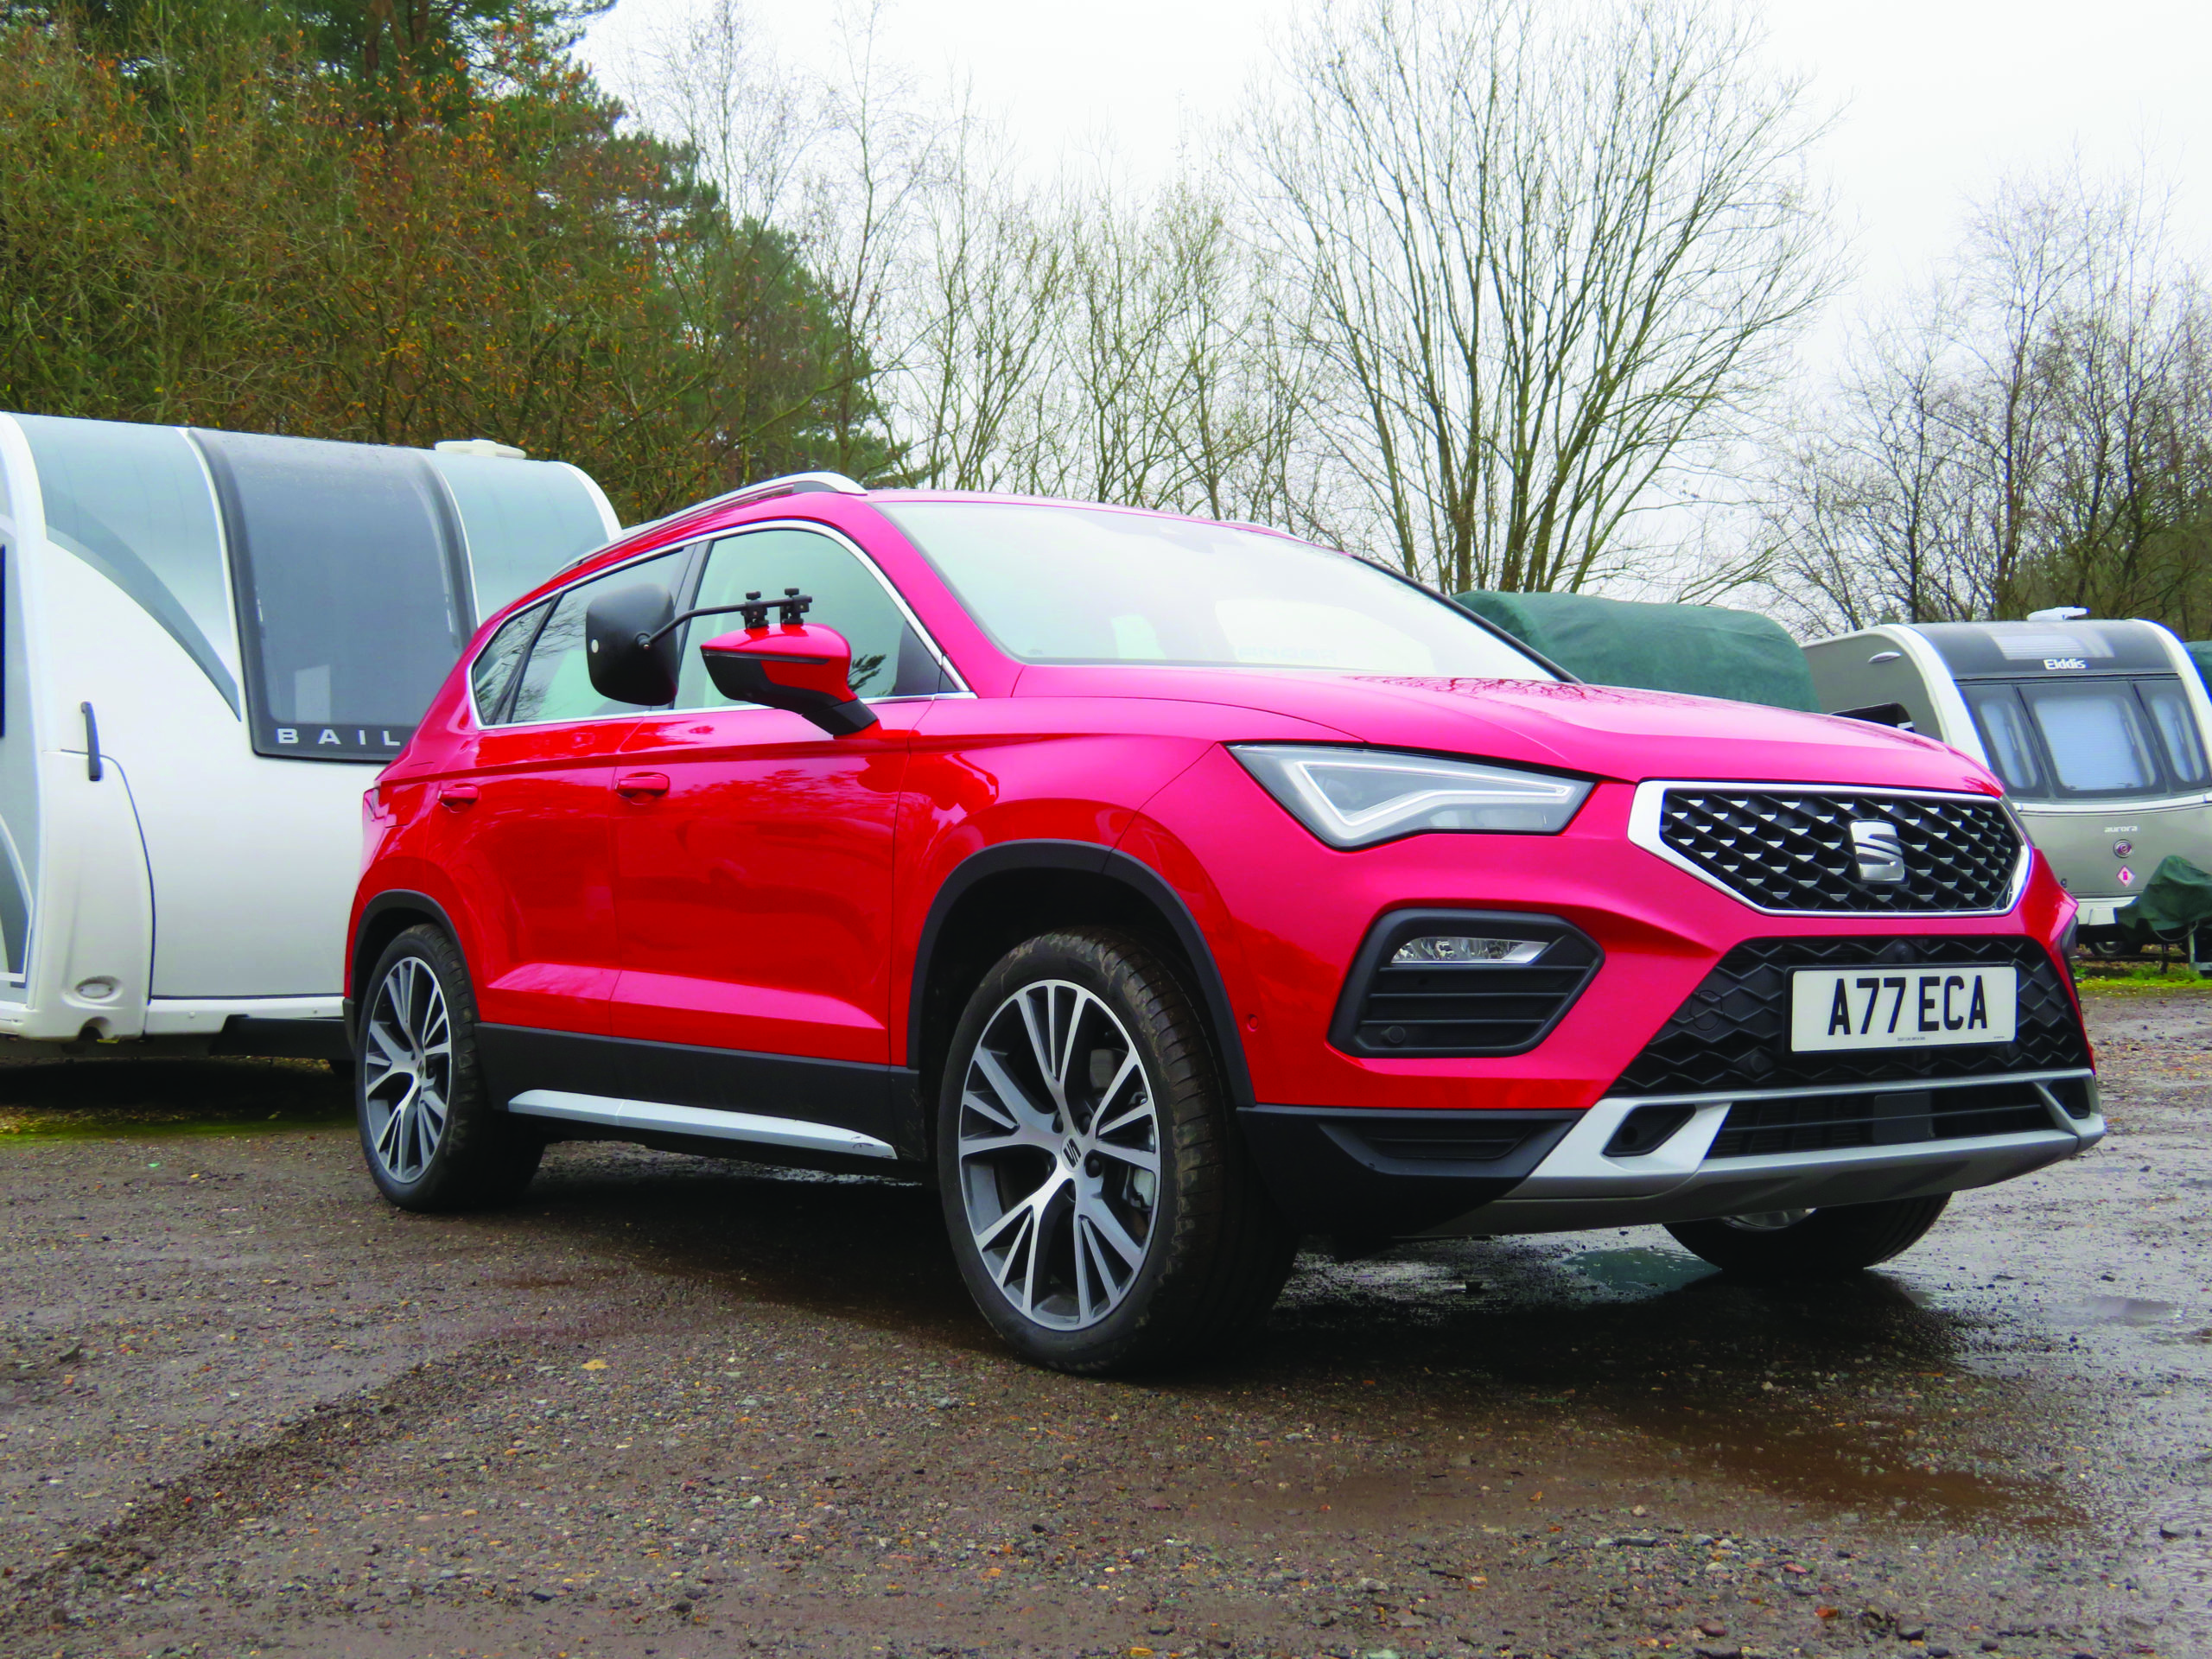 2022 Seat Ateca review – is this updated family SUV now the BEST around?